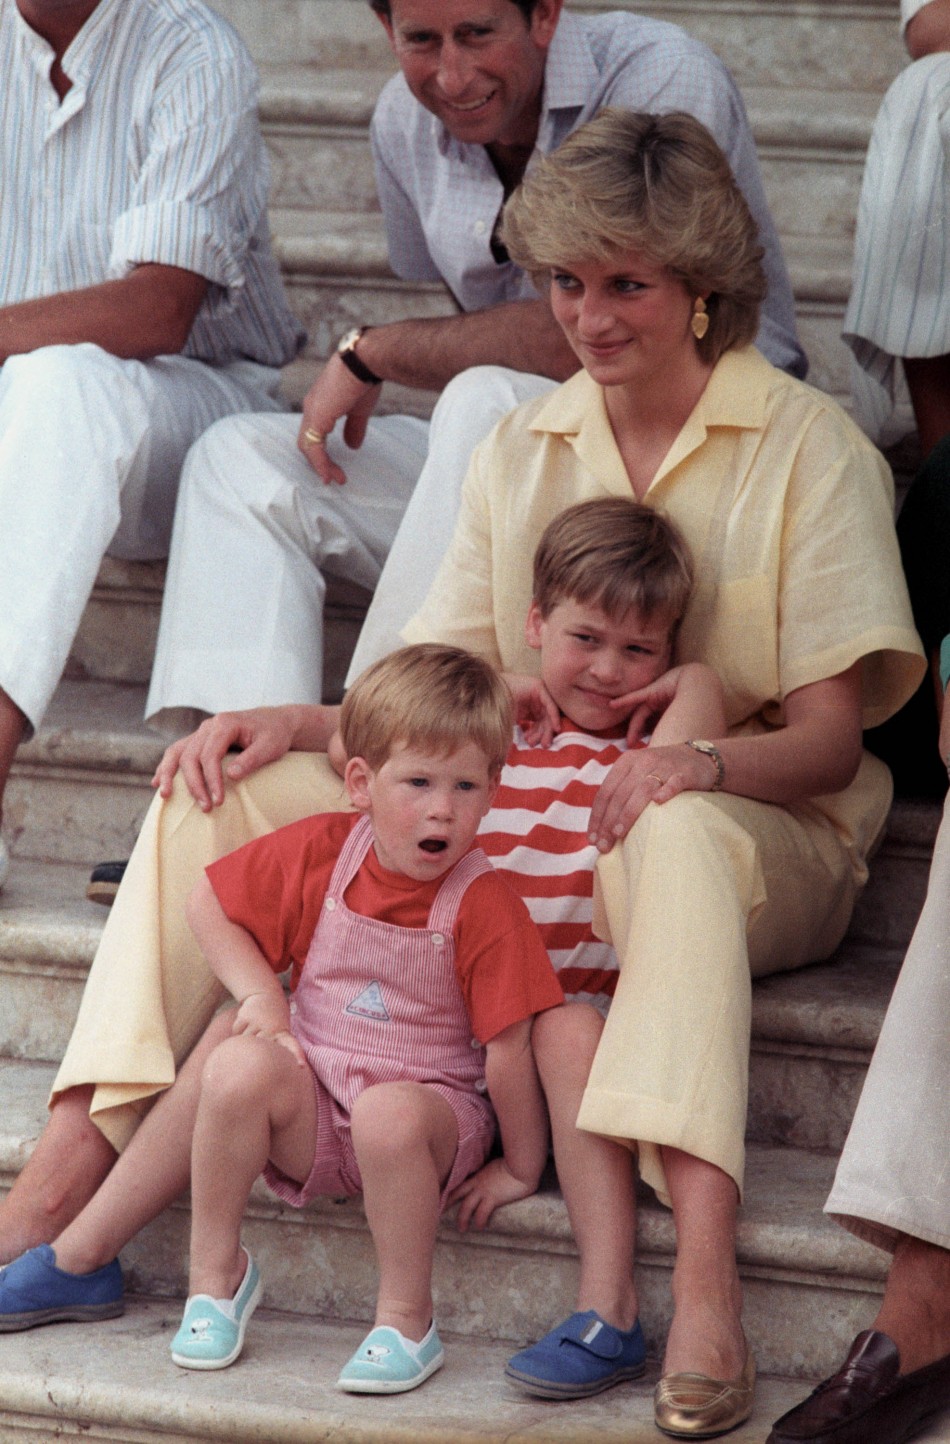 Prince William wishes Princess Diana could have met her 